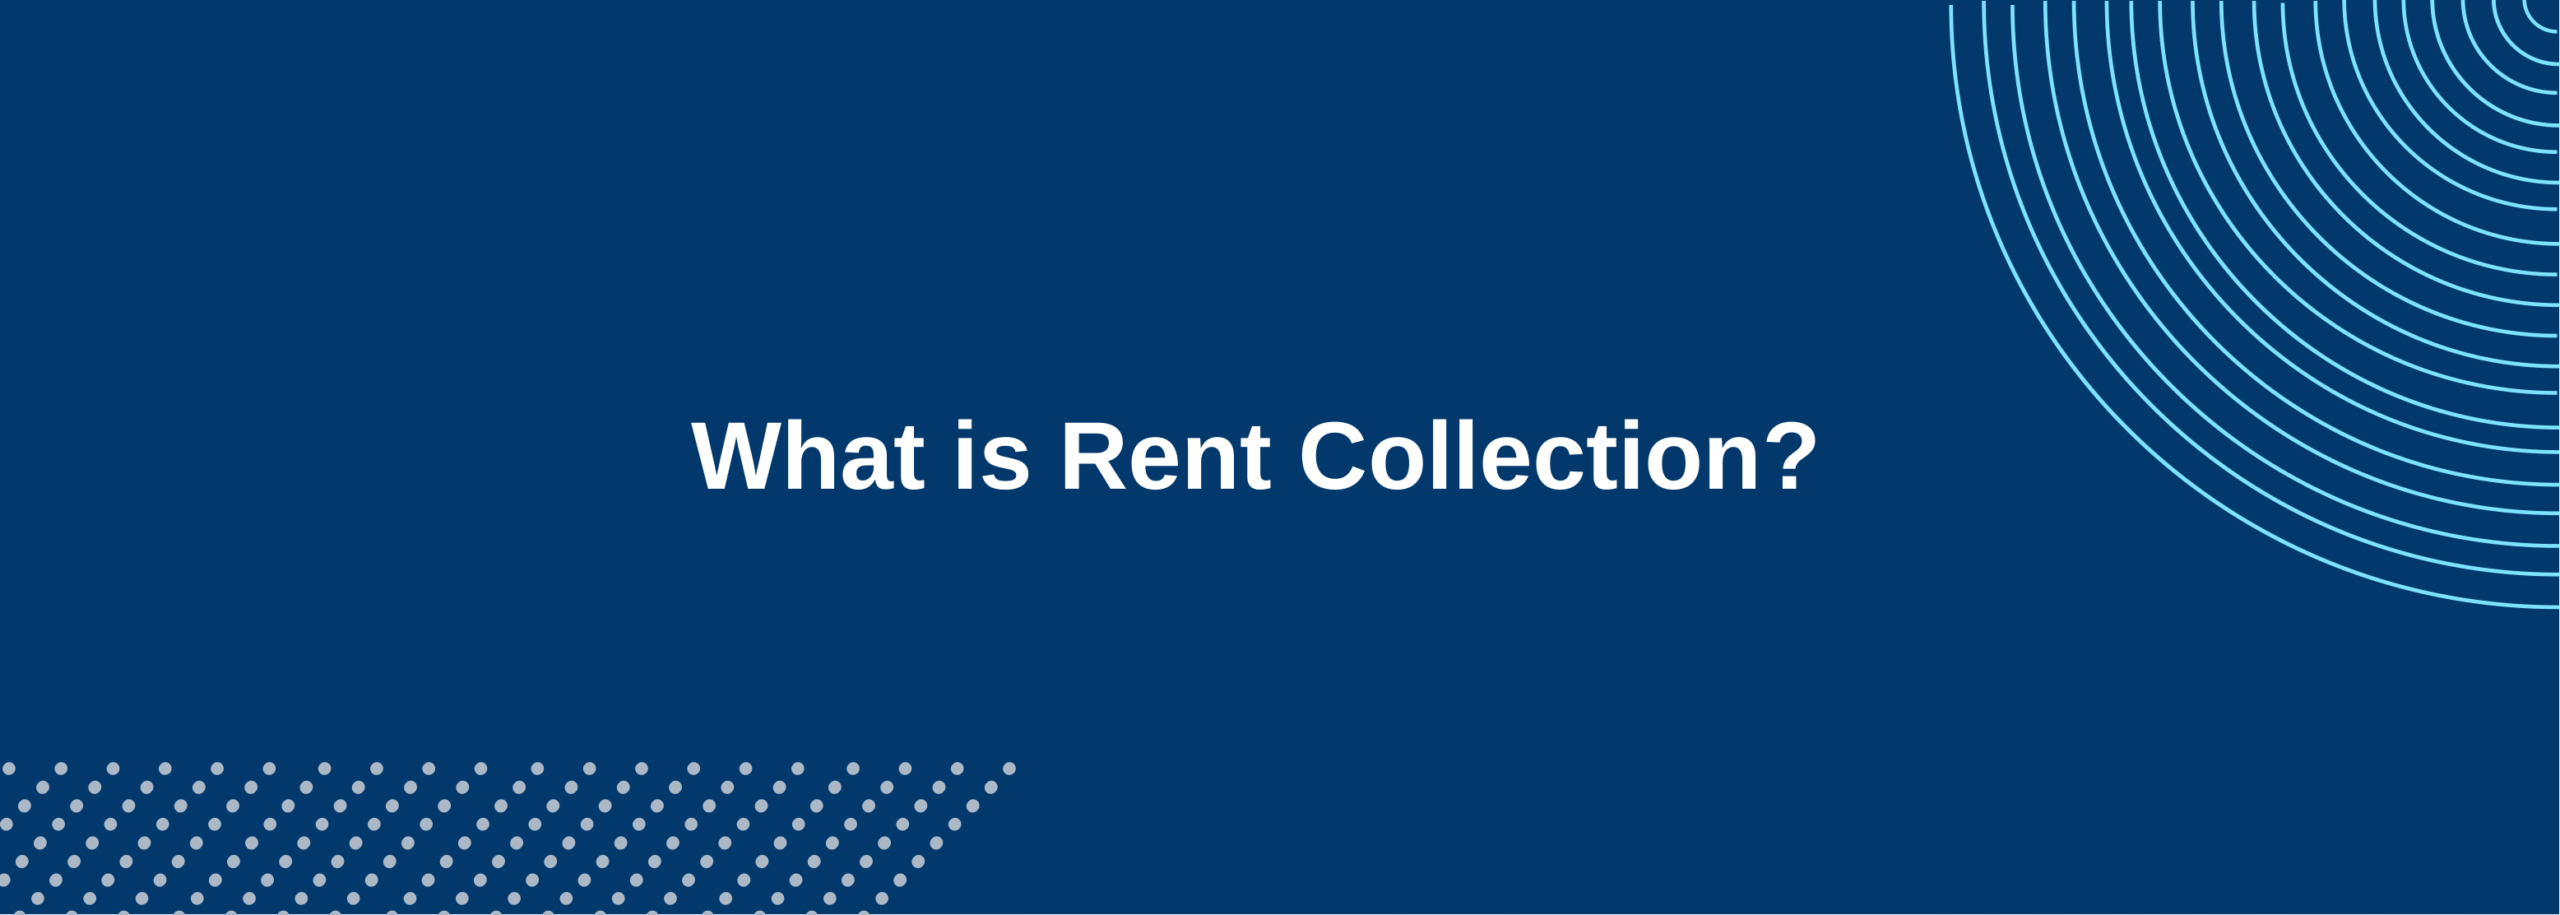 Rent Collection